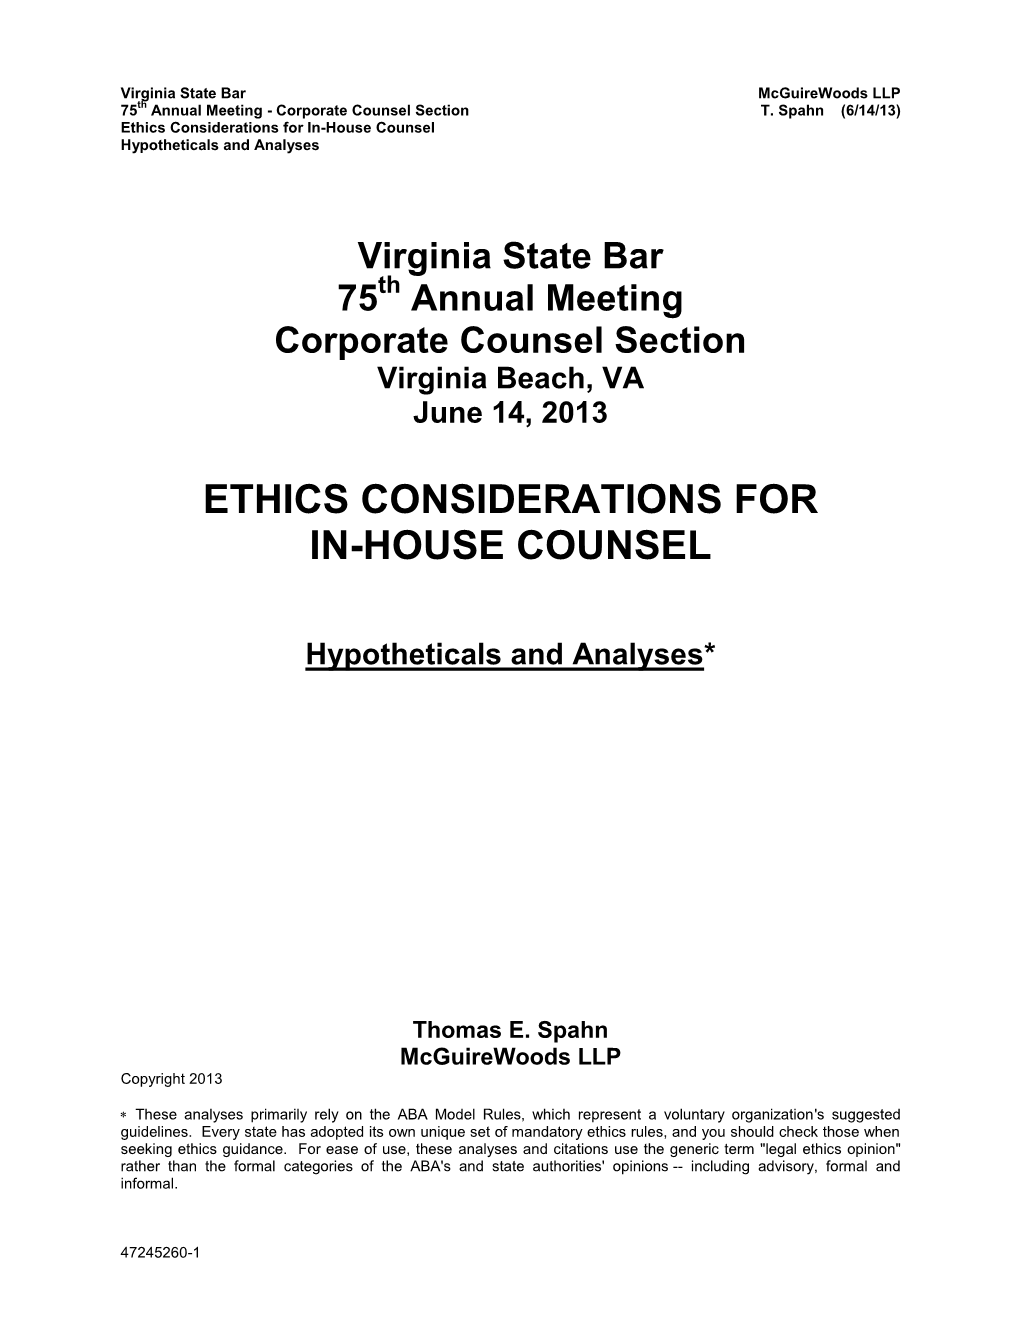 Ethics Considerations for In-House Counsel Hypotheticals and Analyses